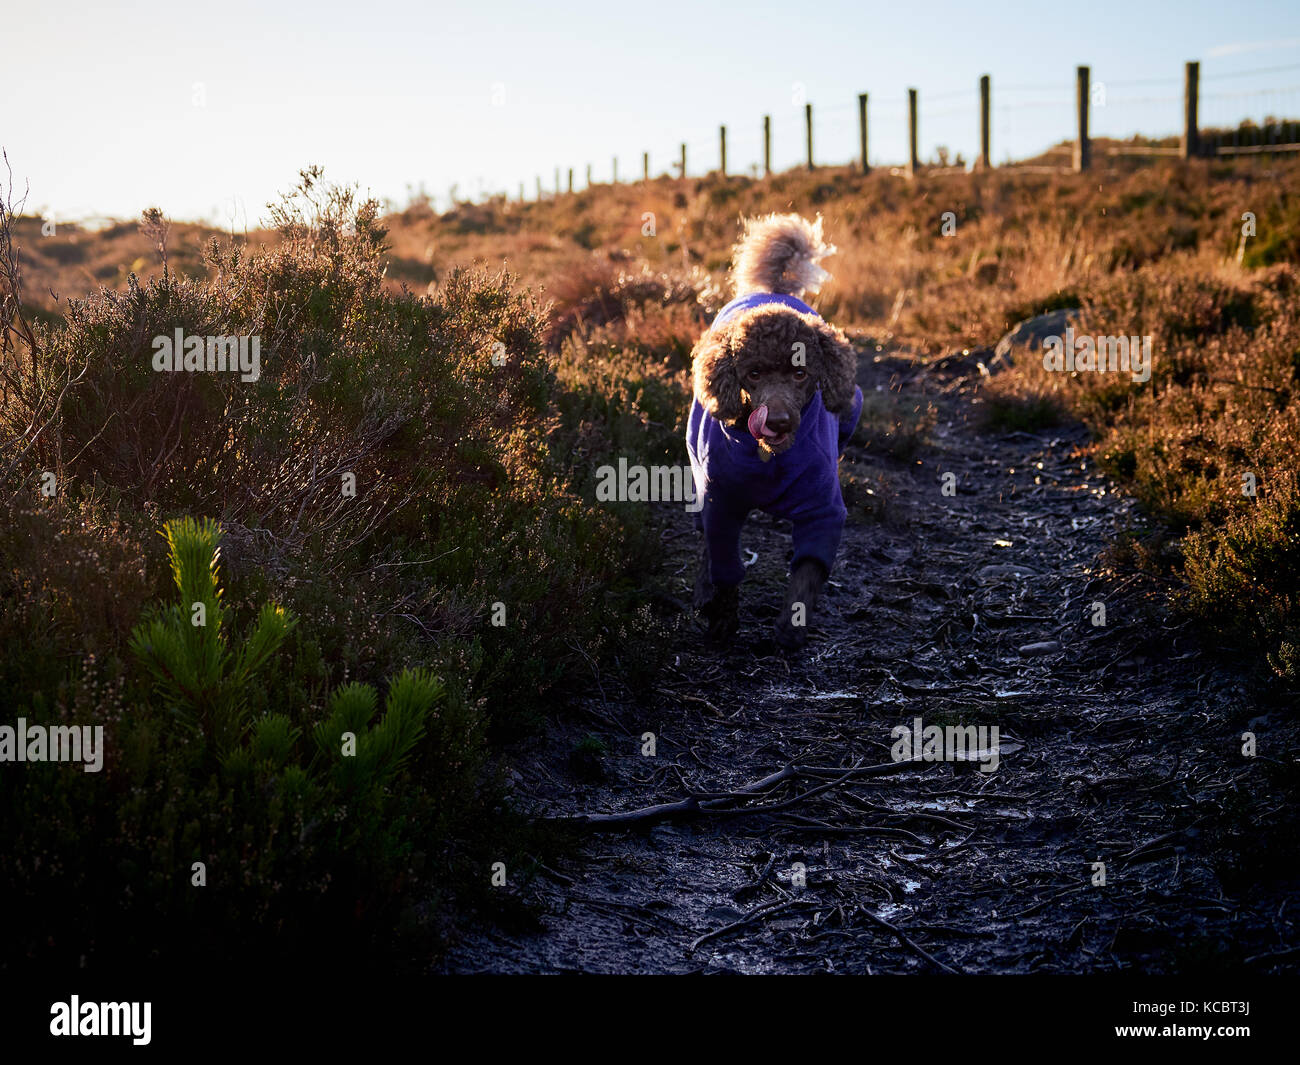 A miniature poodle running along a muddy trail in the Northumberland countryside, England, UK. Stock Photo